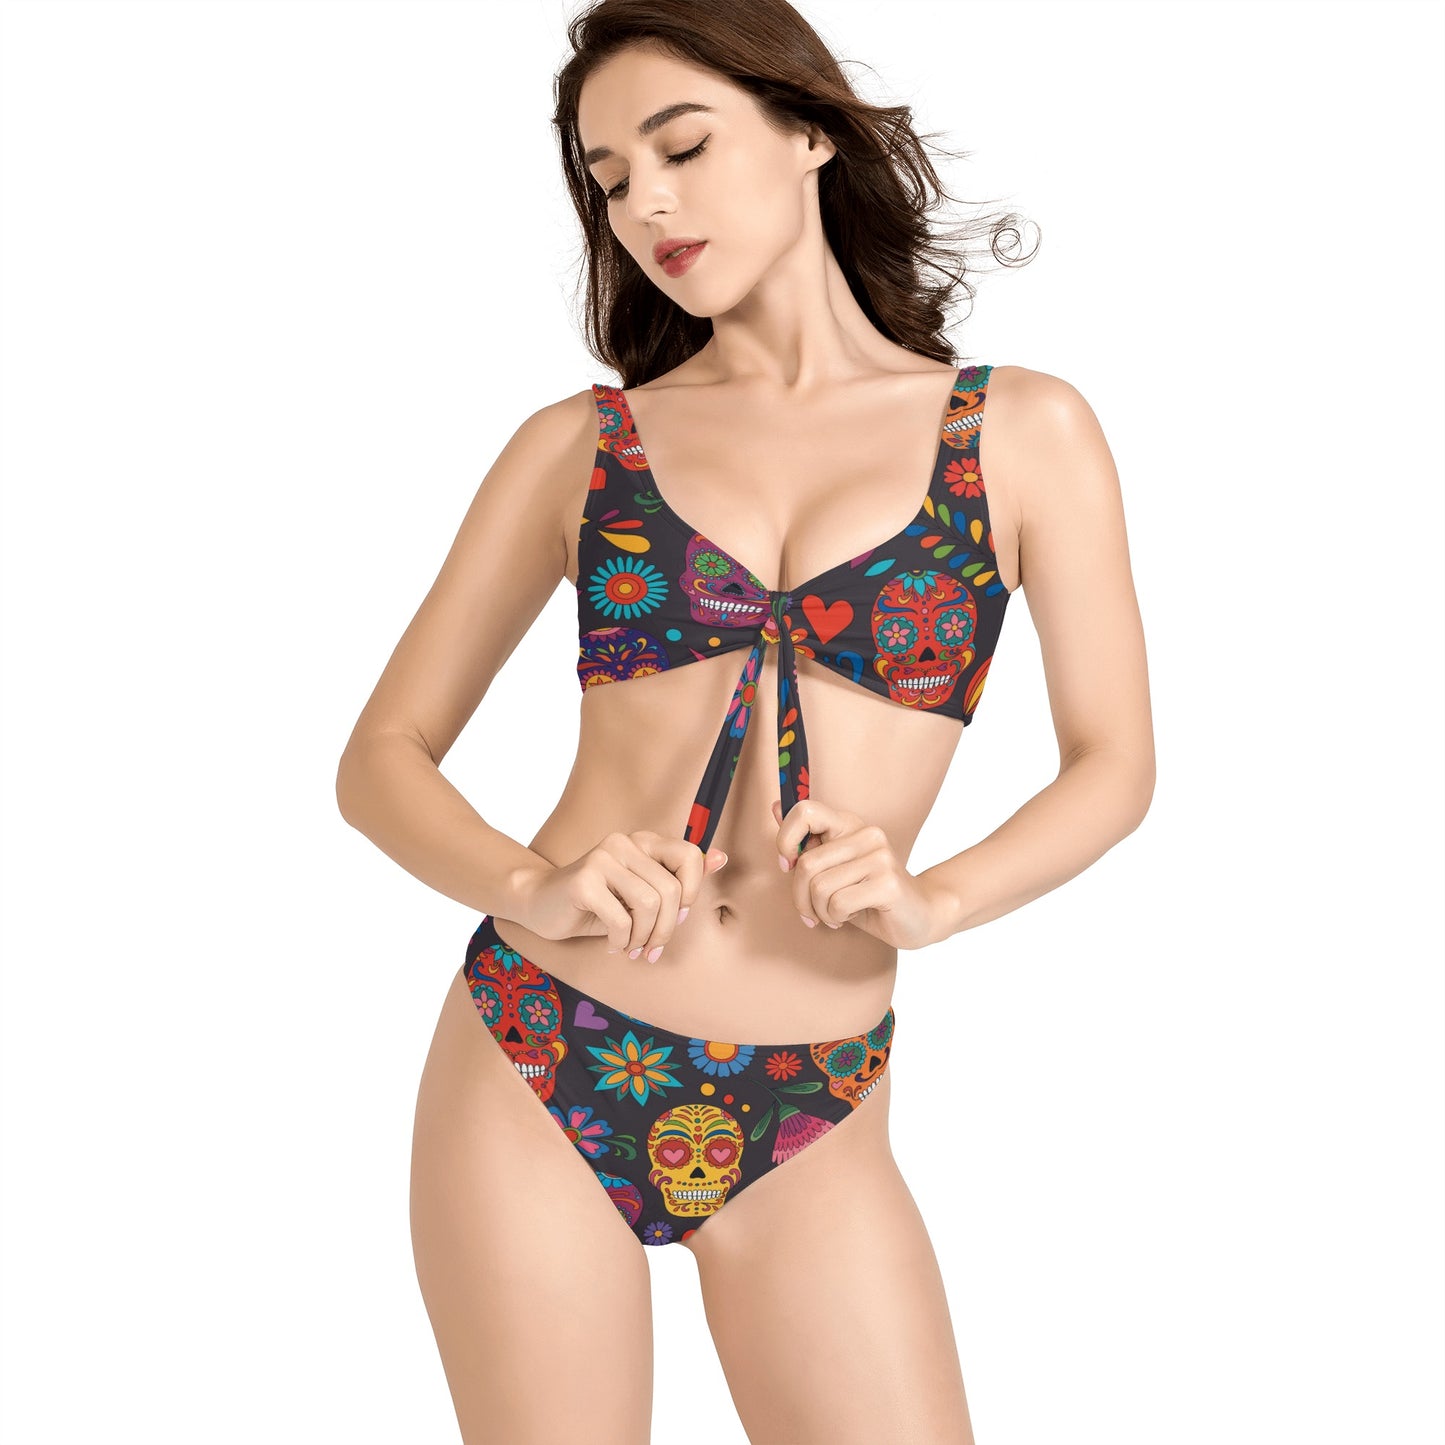 Day of the dead candy skull gothic Women's Bow Front Bikinis Swimsuit